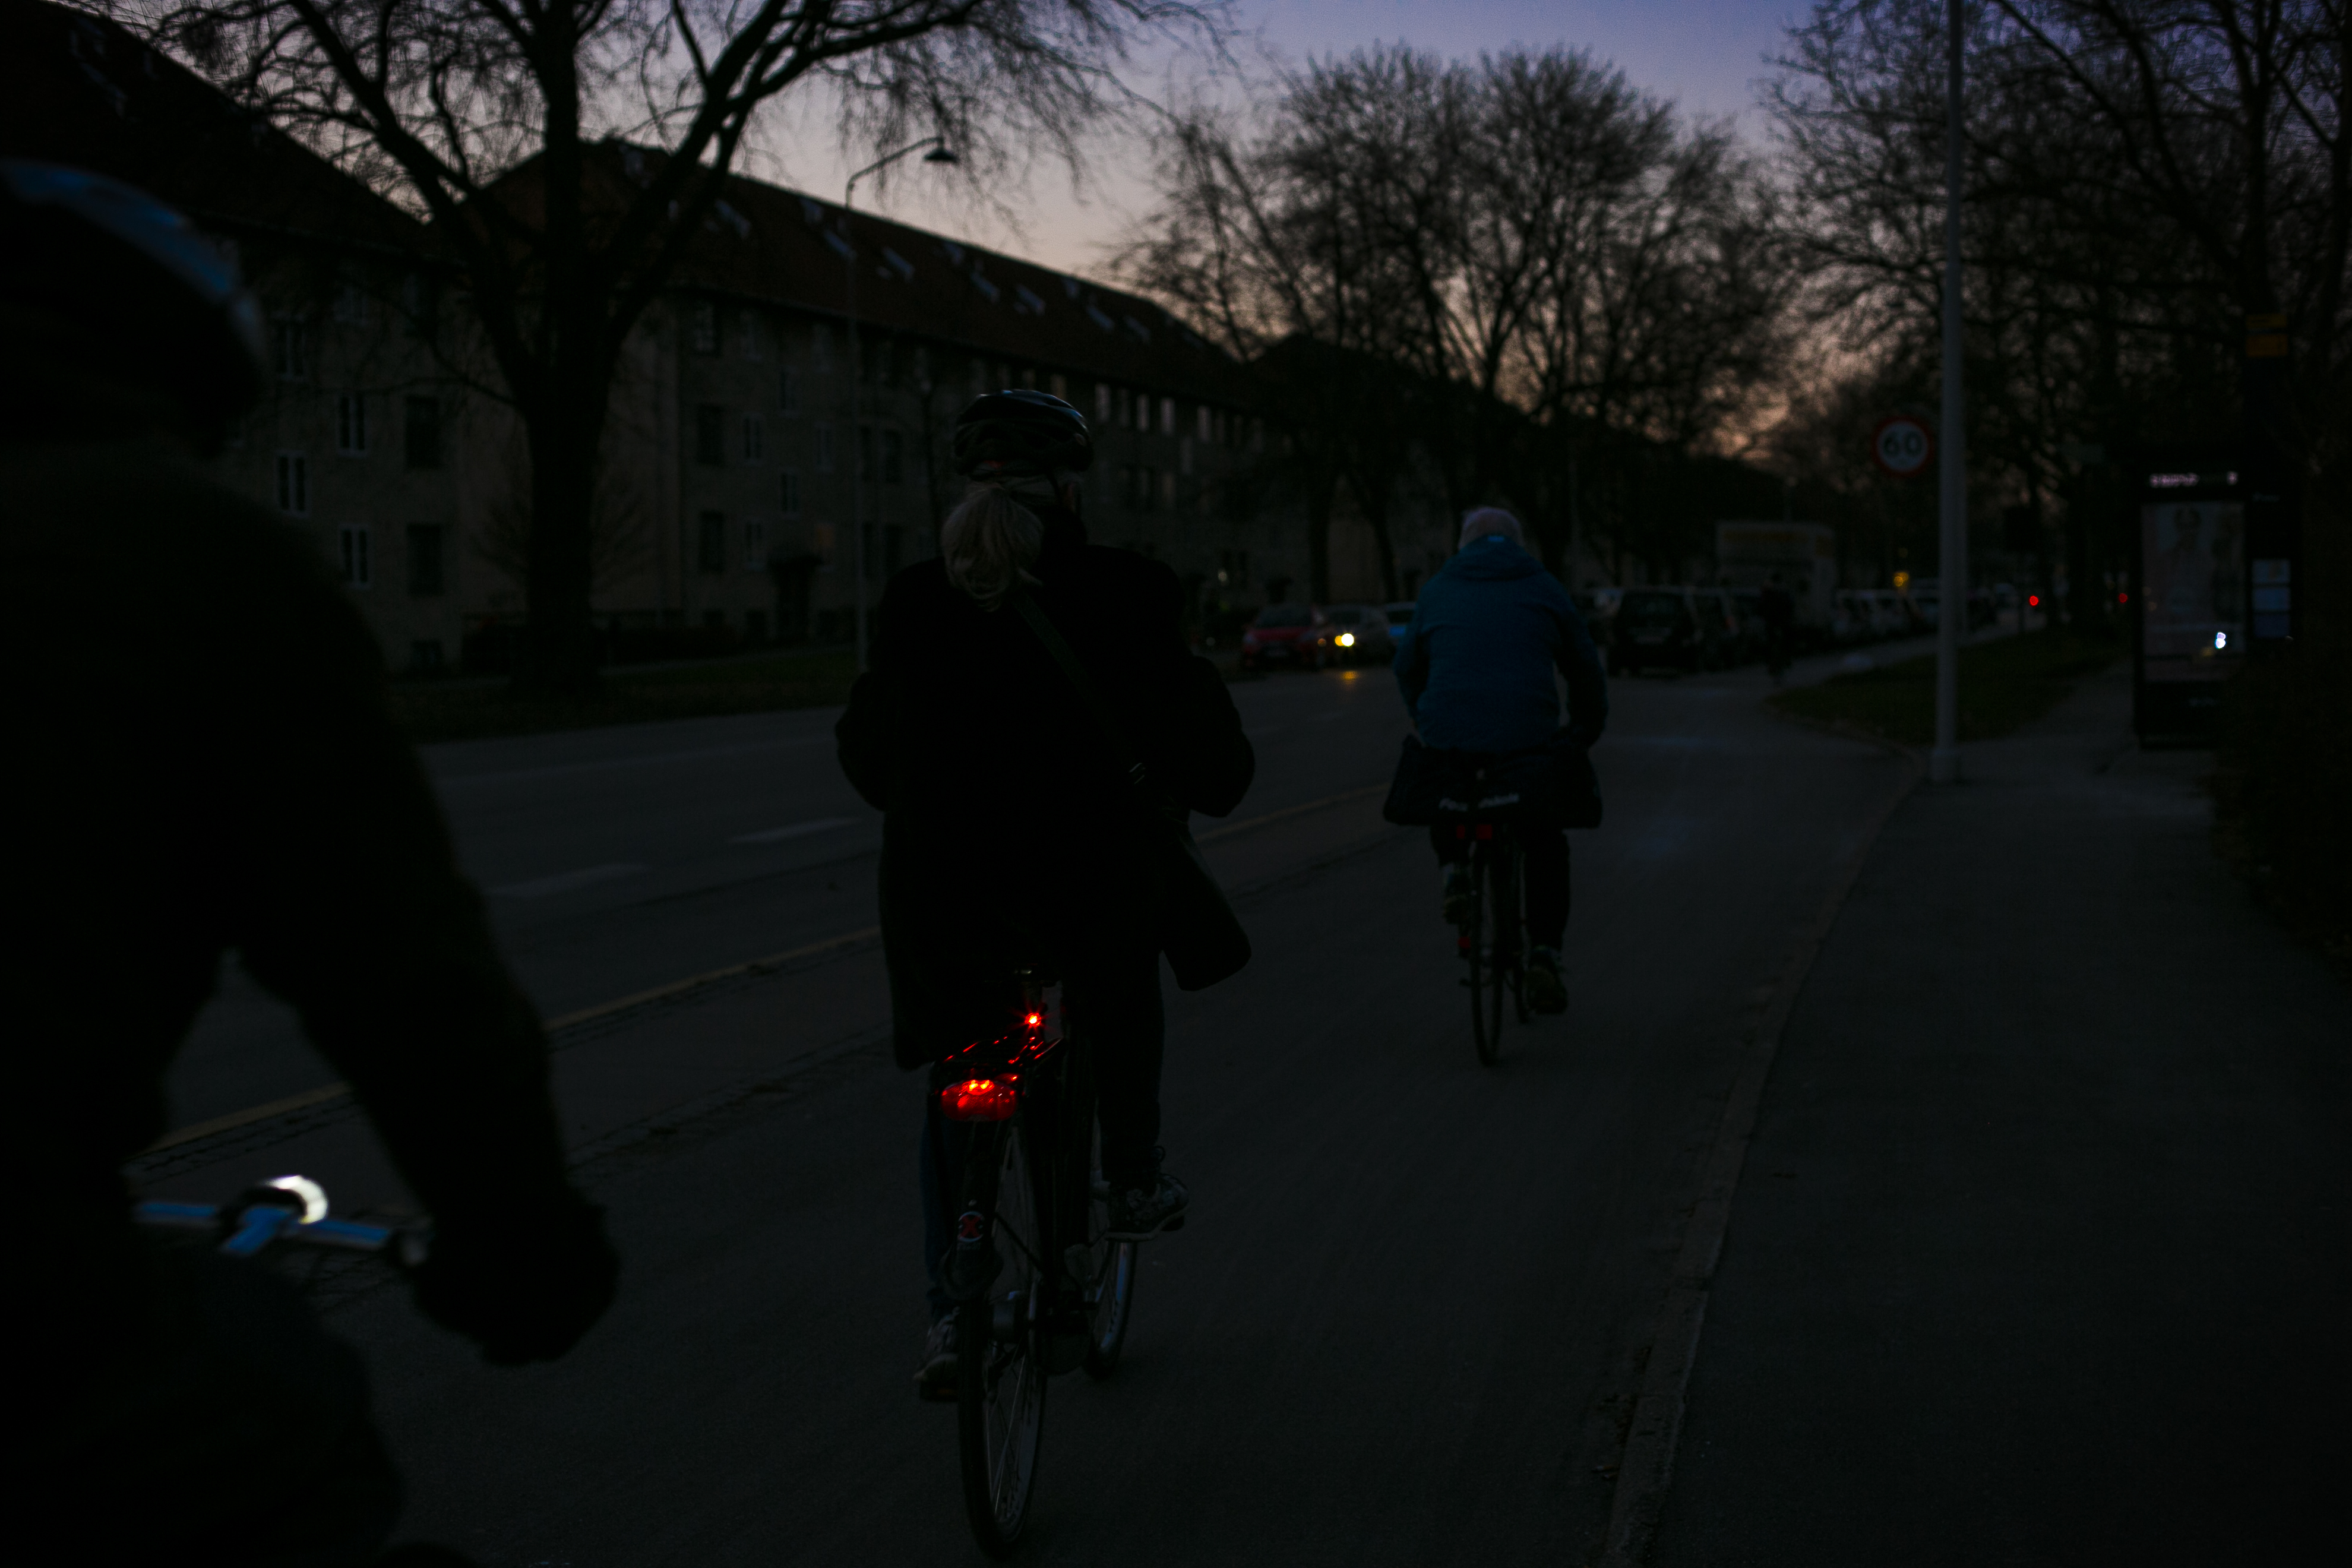 Fluorescence, your name is woman!  Men are more likely to cycle without lights